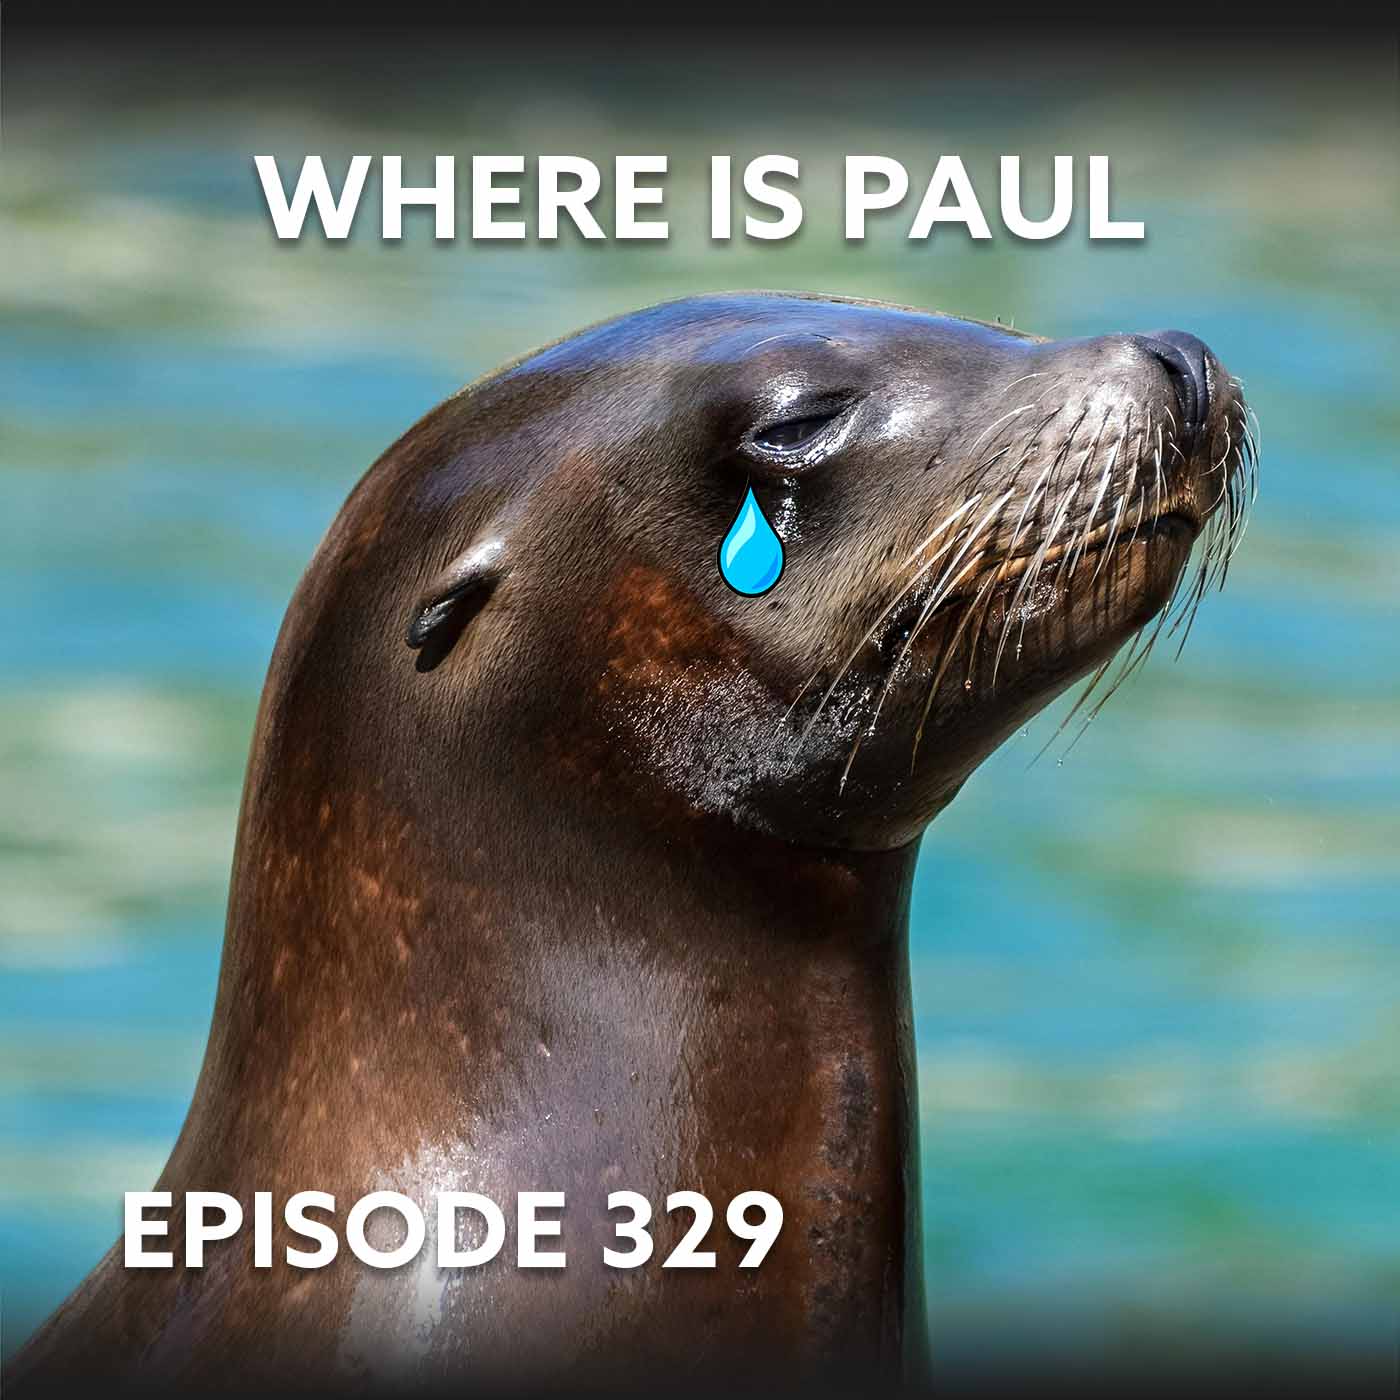 Episode 329 – Where is Paul